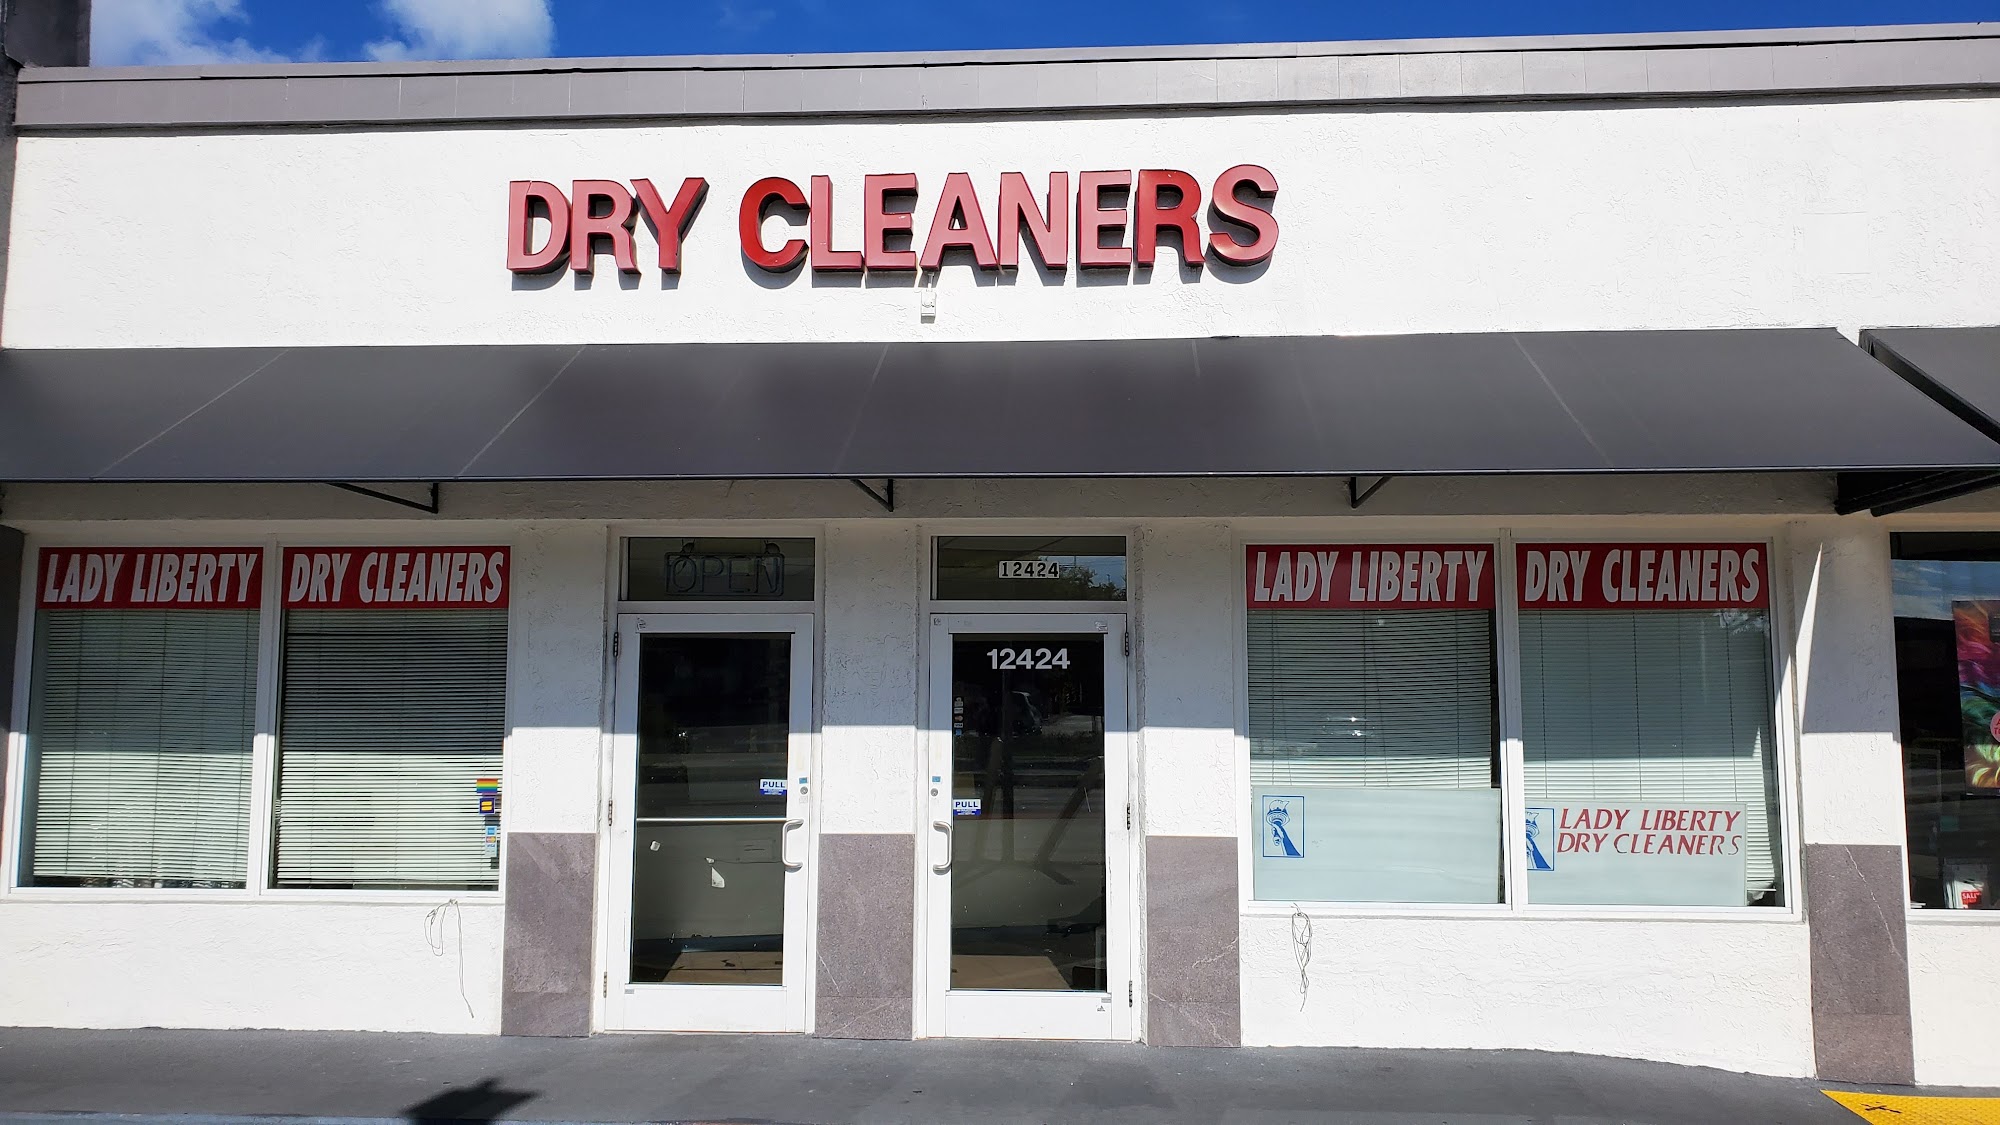 Lady Liberty Dry Cleaners